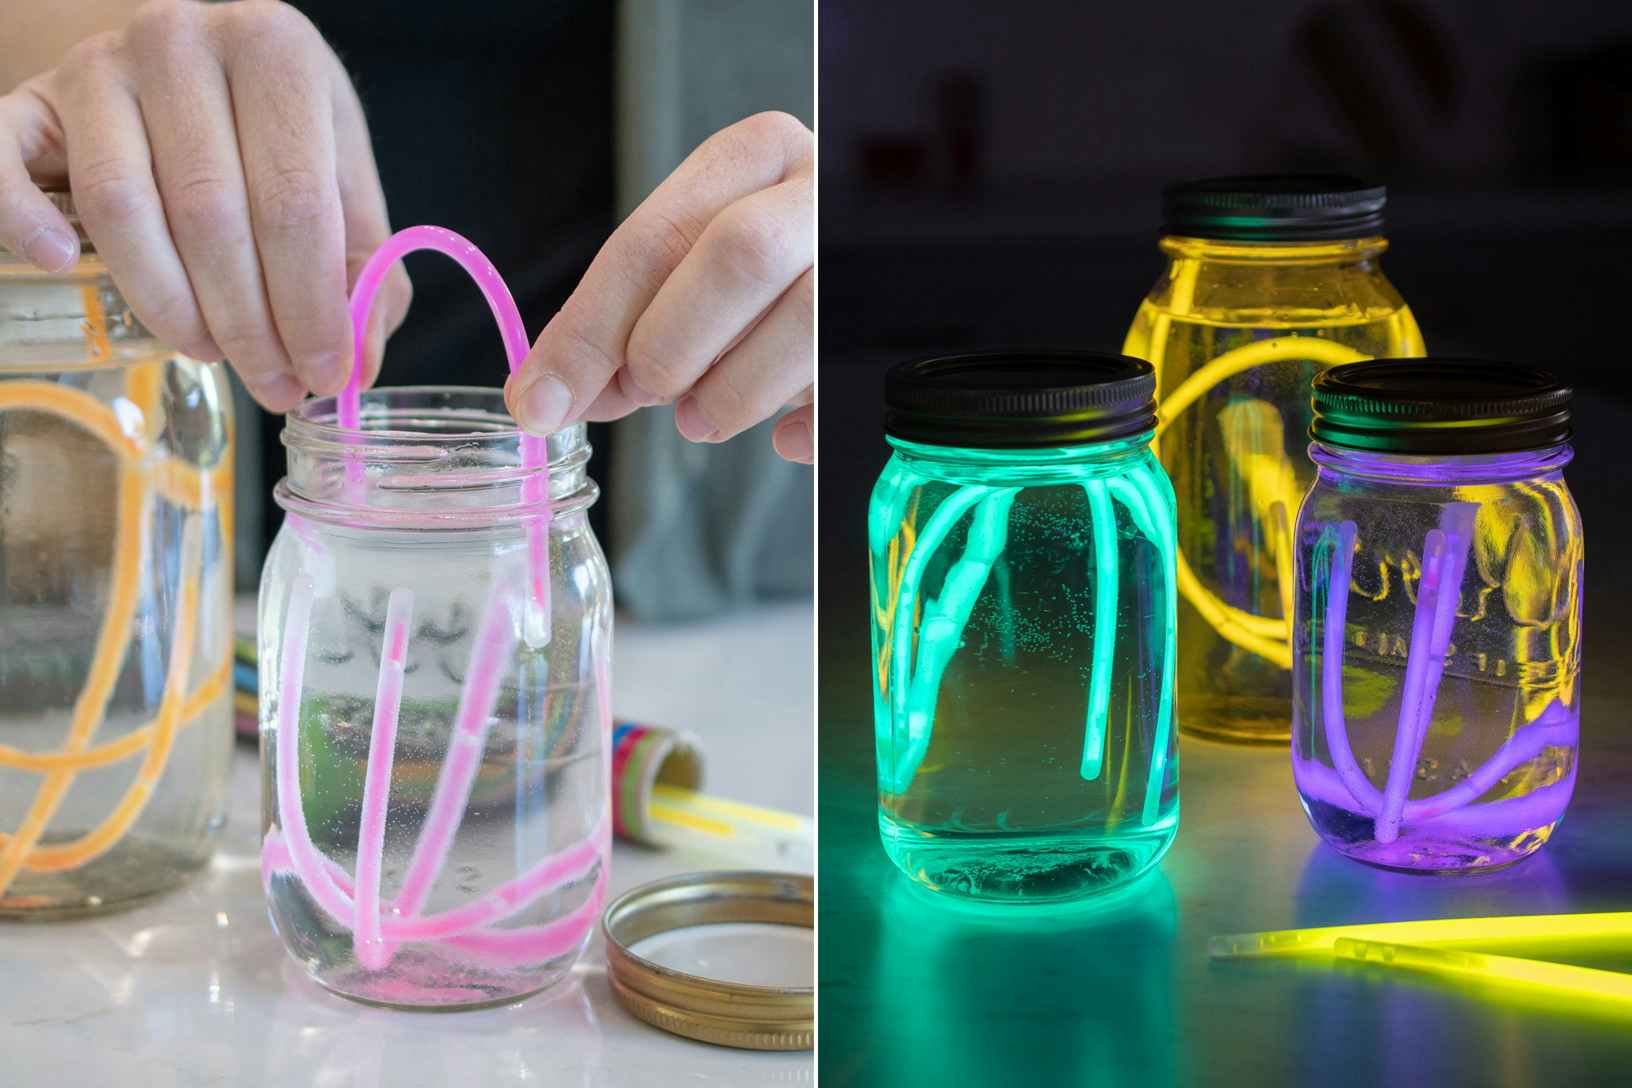 A person's hands putting glow sticks into a mason jar, and some mason jars filled with glow sticks glowing in the dark.